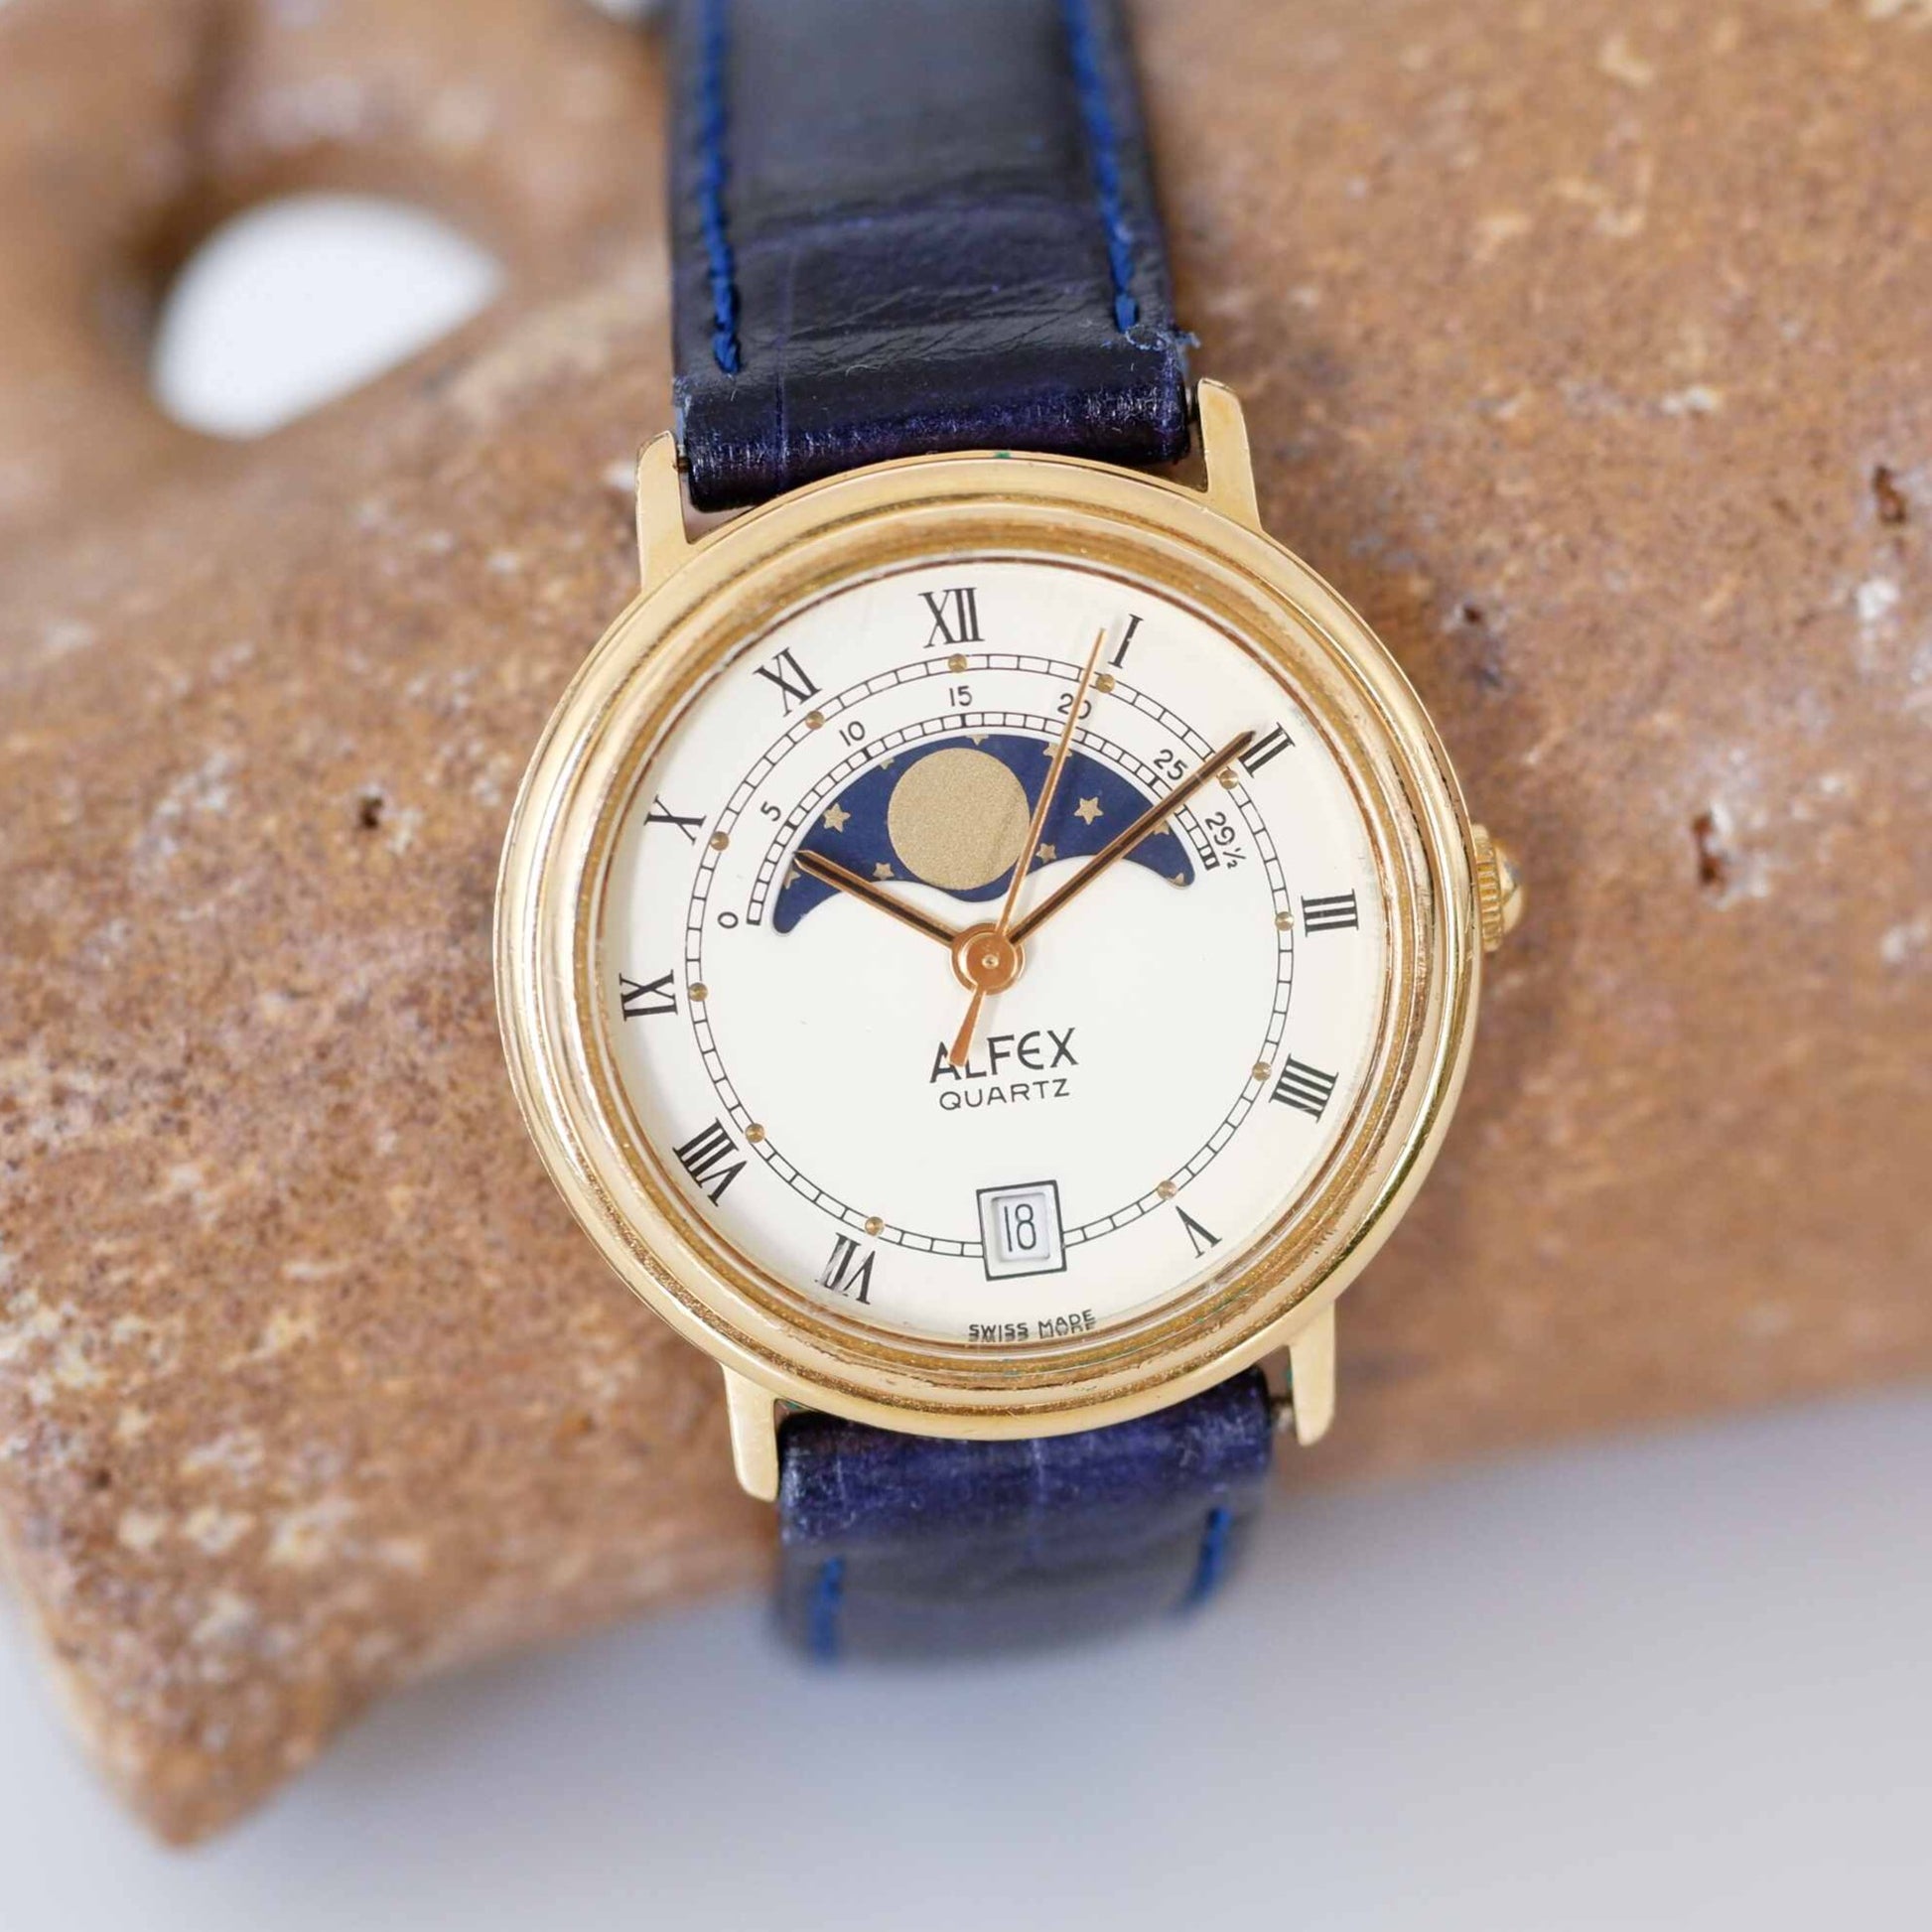 Copy of Alfex Vintage Ladies Watch: 80s Gold, Rectangular Moon Phase Style | Second Front Side